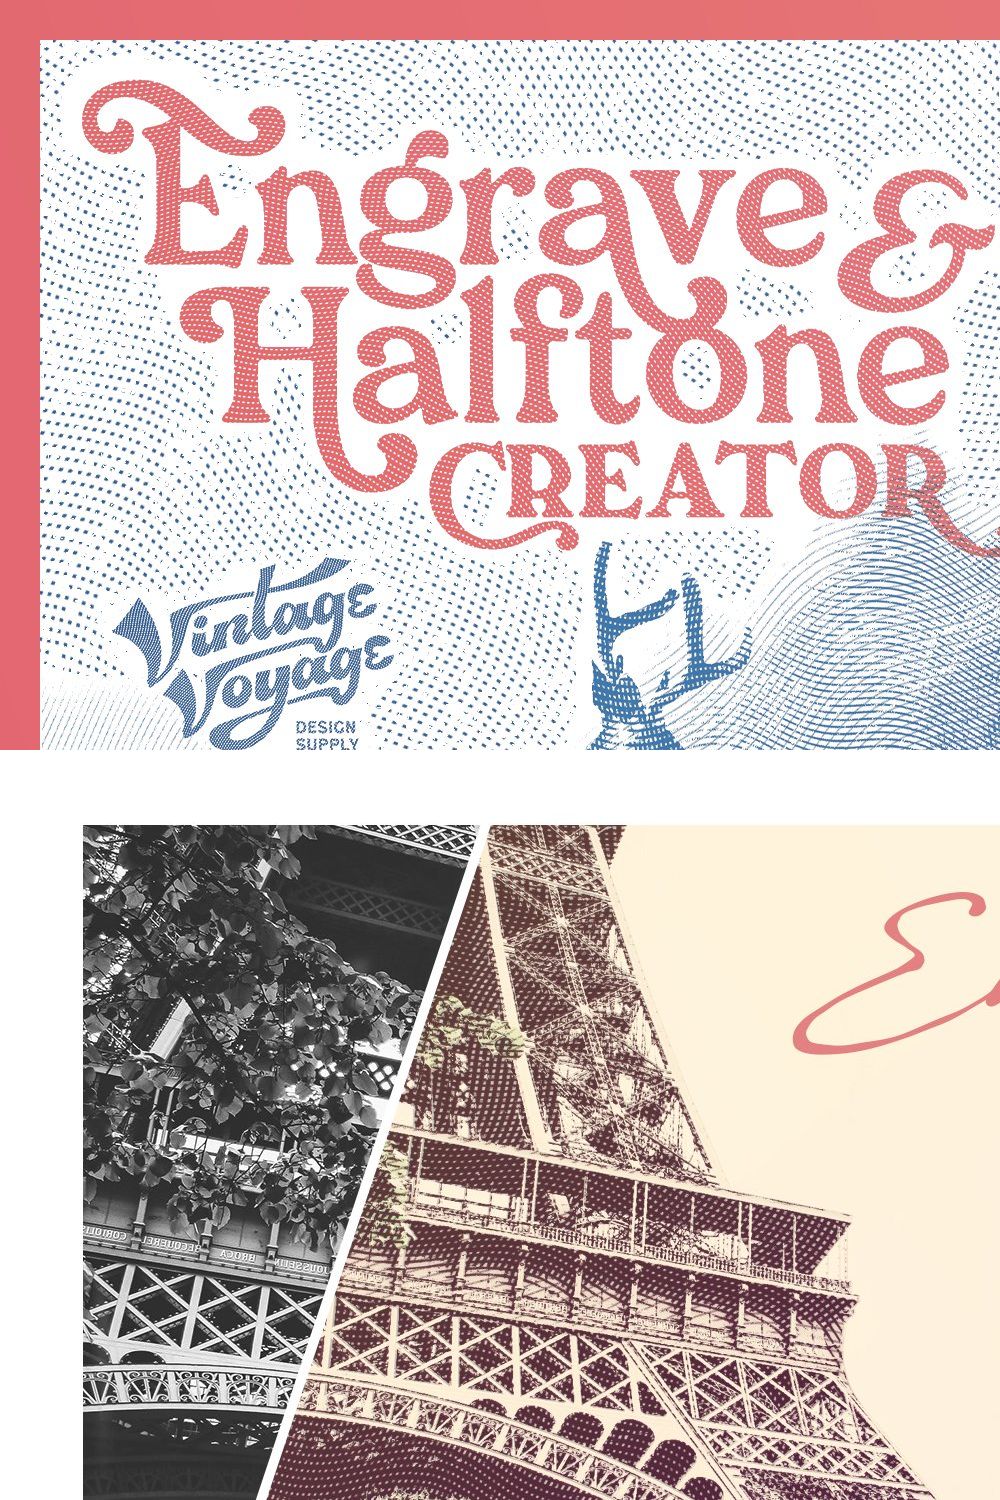 Engrave and Halftone Creator pinterest preview image.